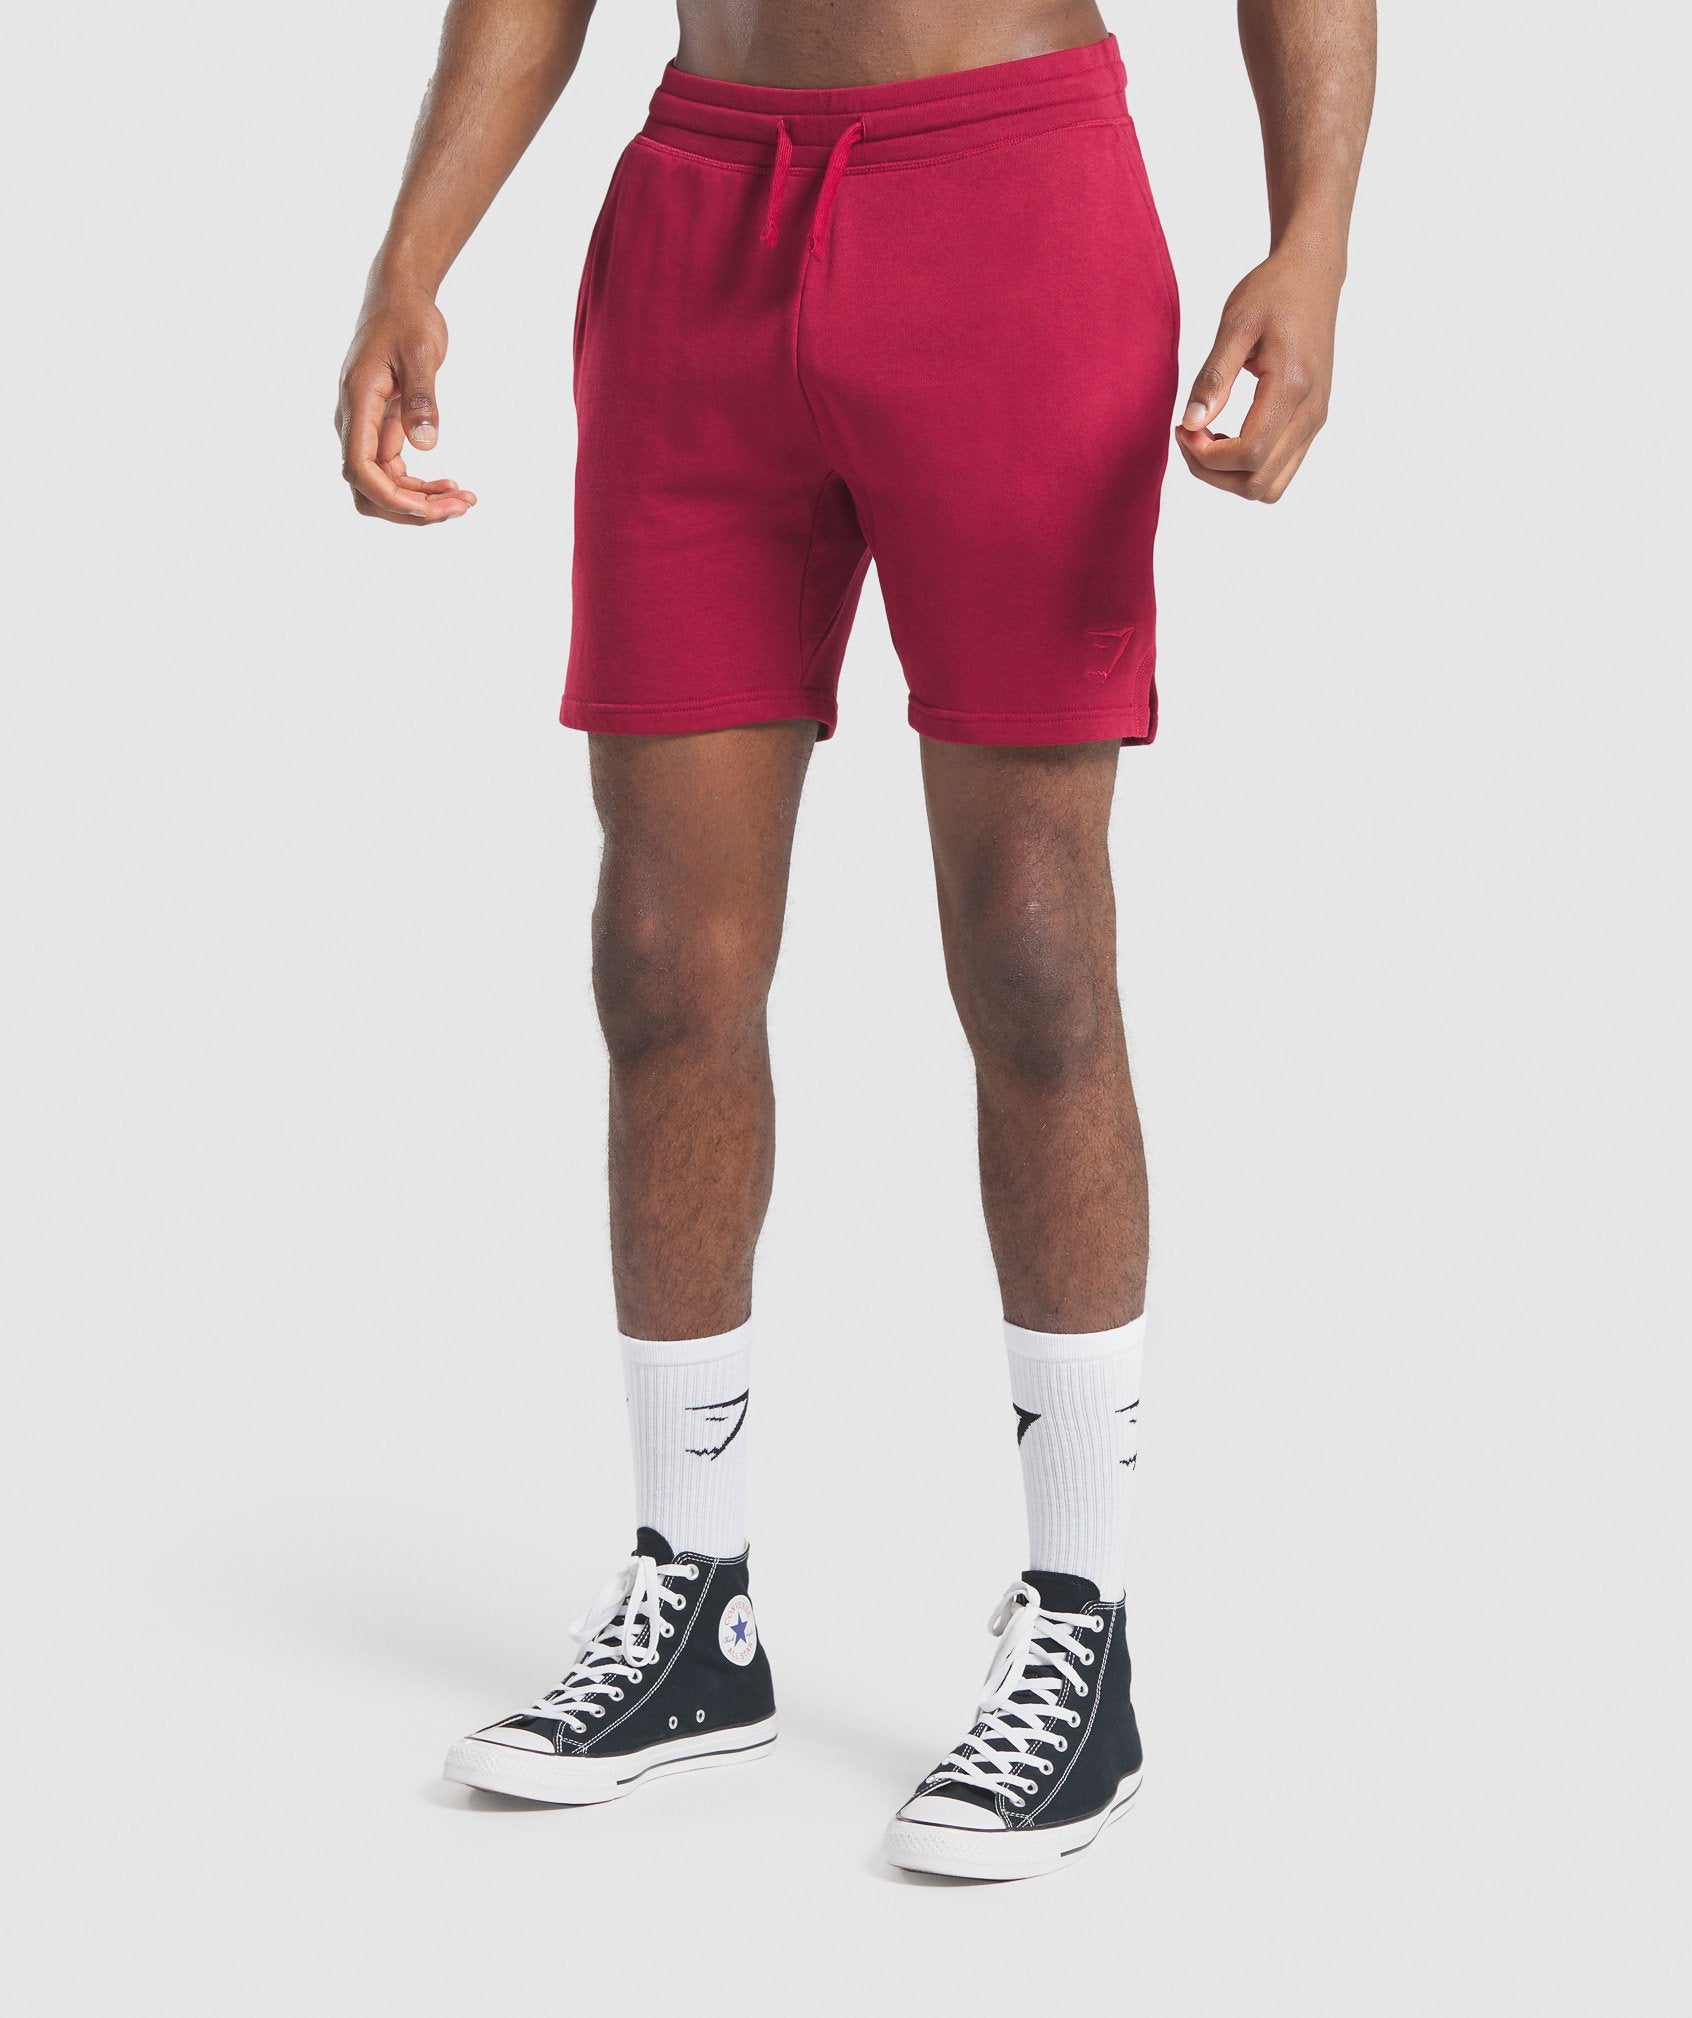 Compound Shorts in Burgundy - view 1